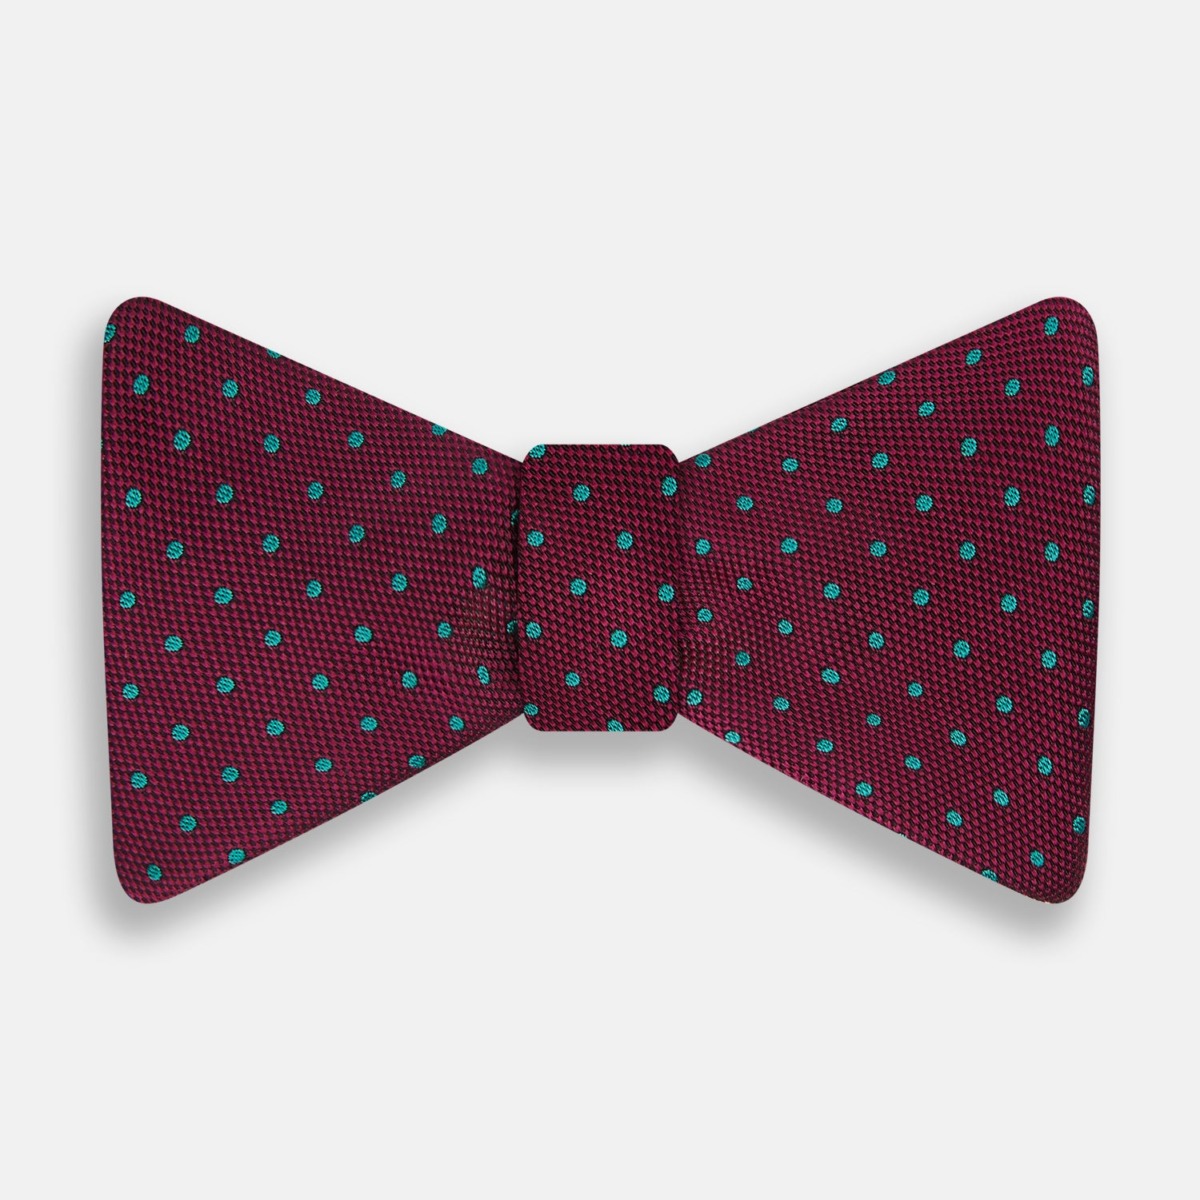 Turnbull & Asser Bow Tie Green for Man at Turnbull And Asser GOOFASH